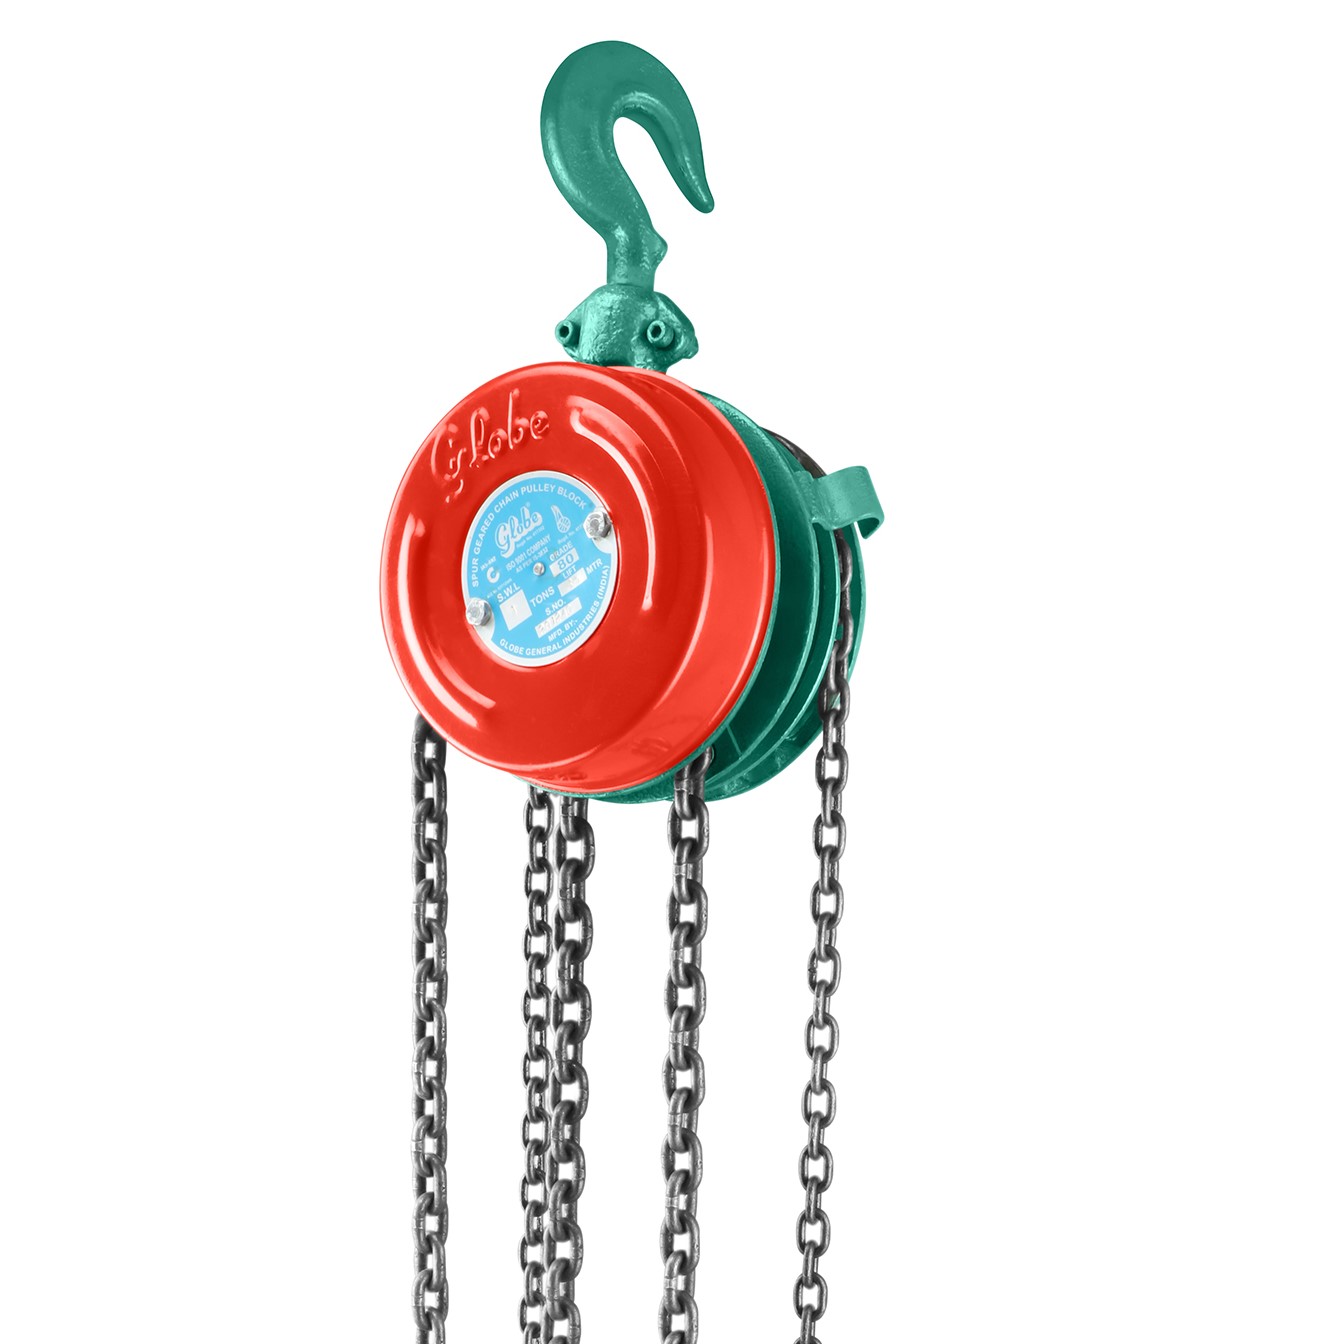 Chain pulley Block